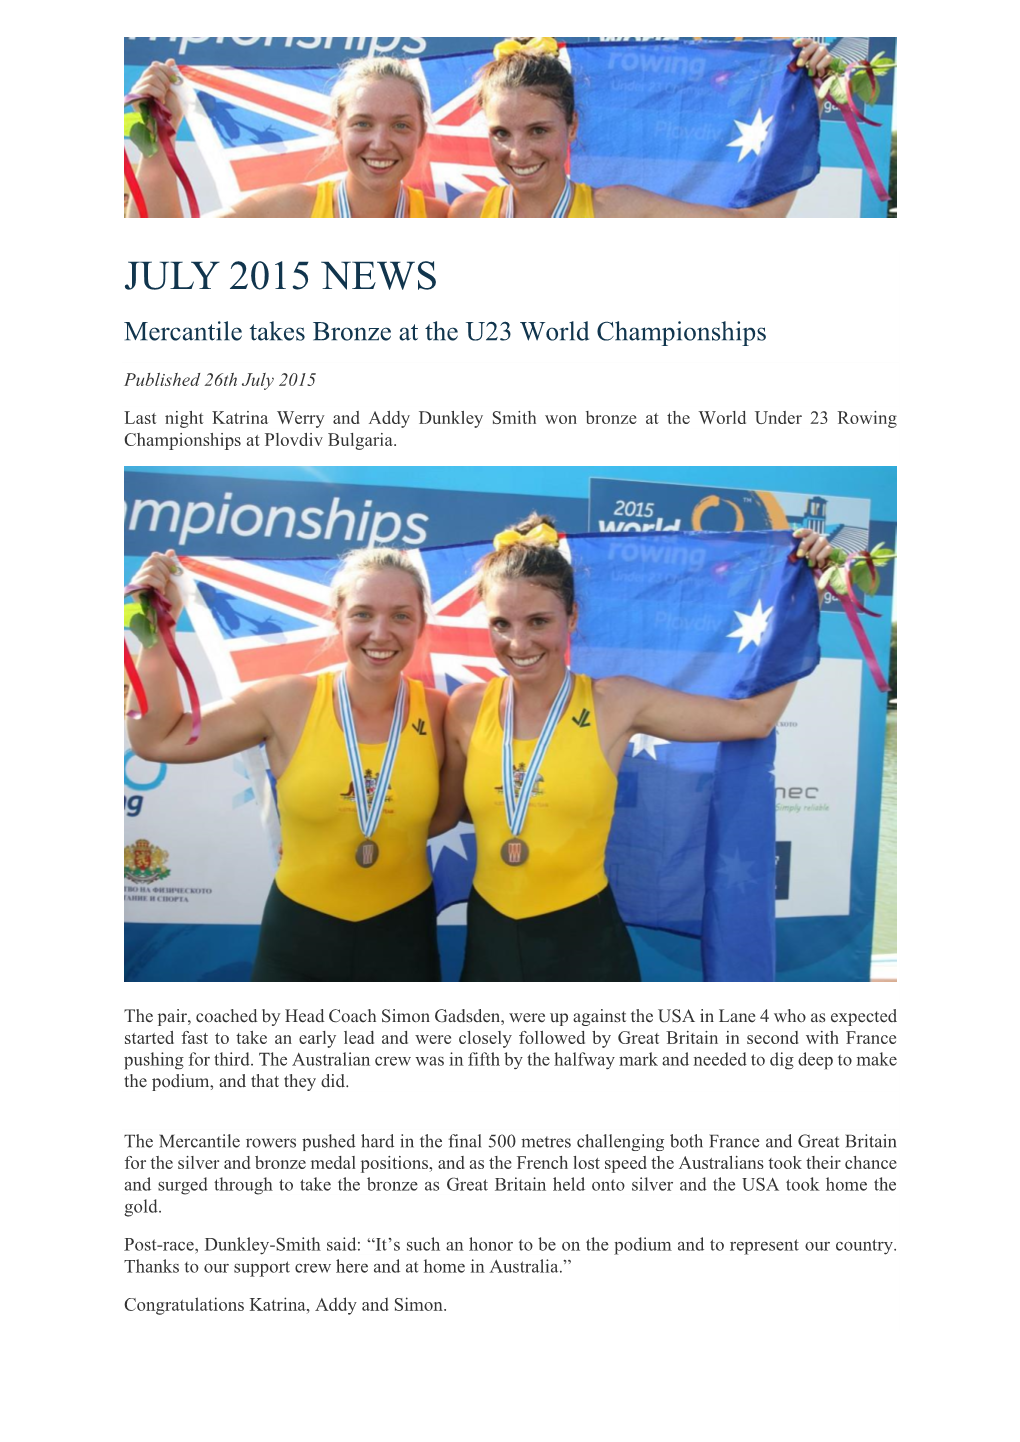 JULY 2015 NEWS Mercantile Takes Bronze at the U23 World Championships